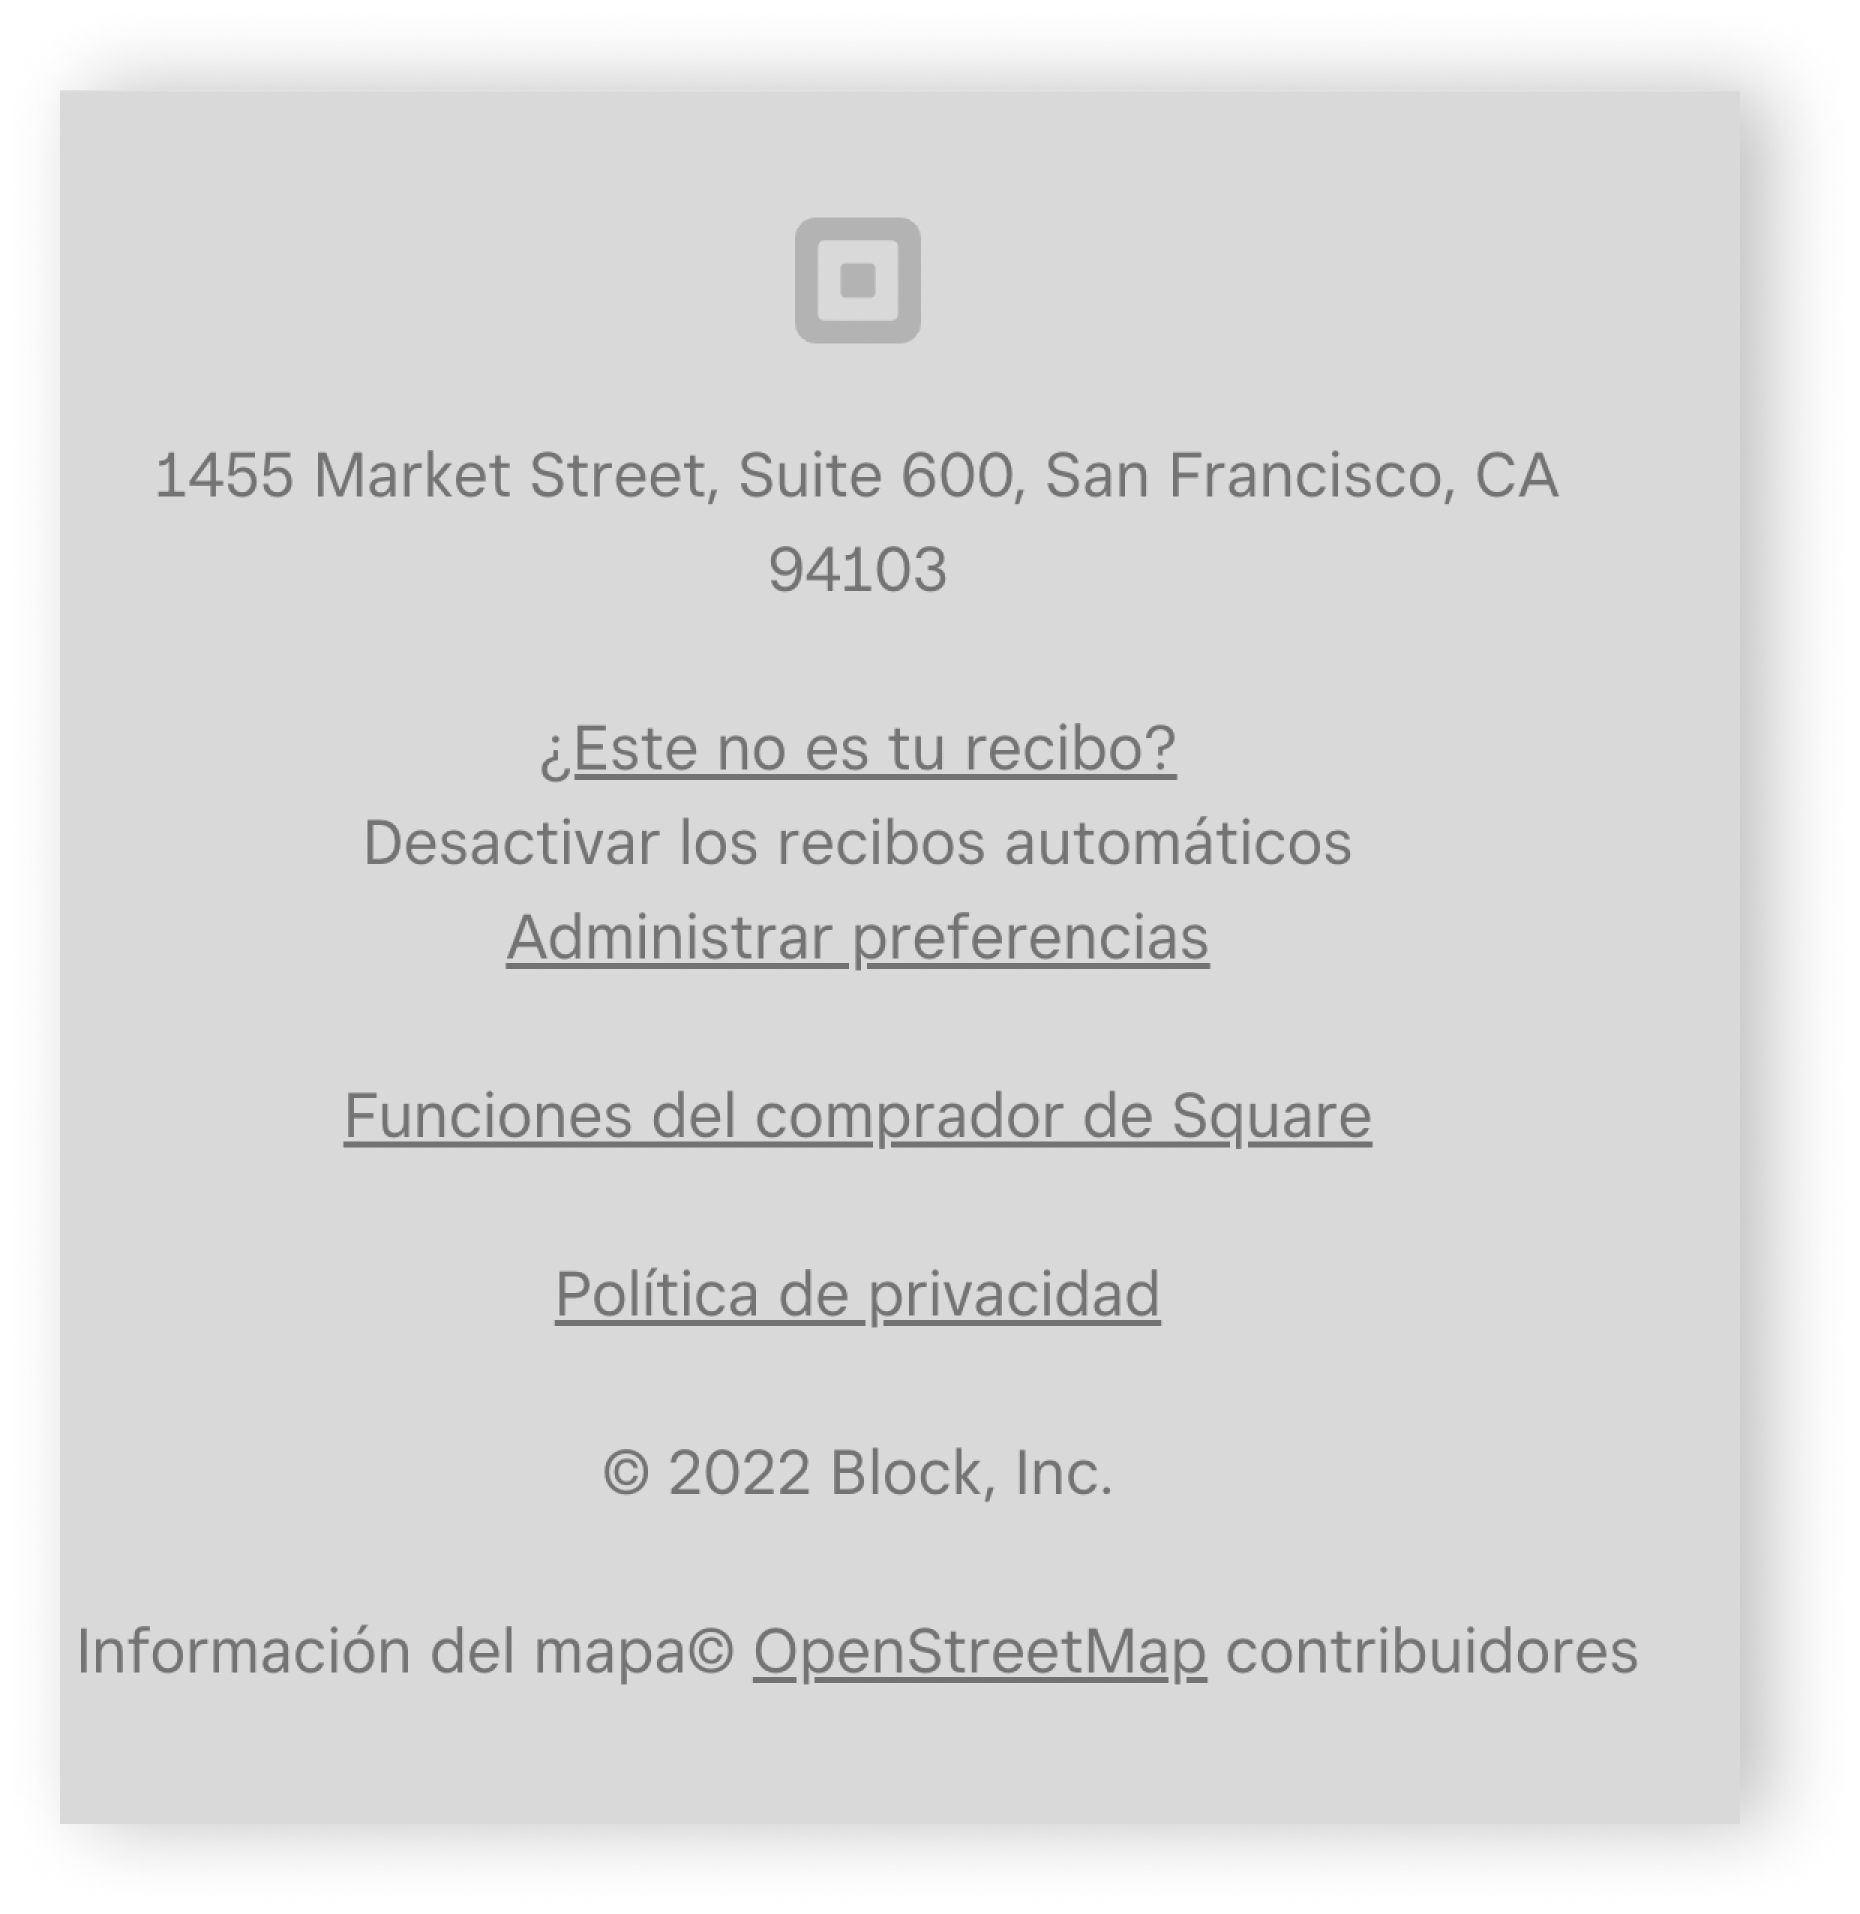 Square Profile Unsubscribe Email